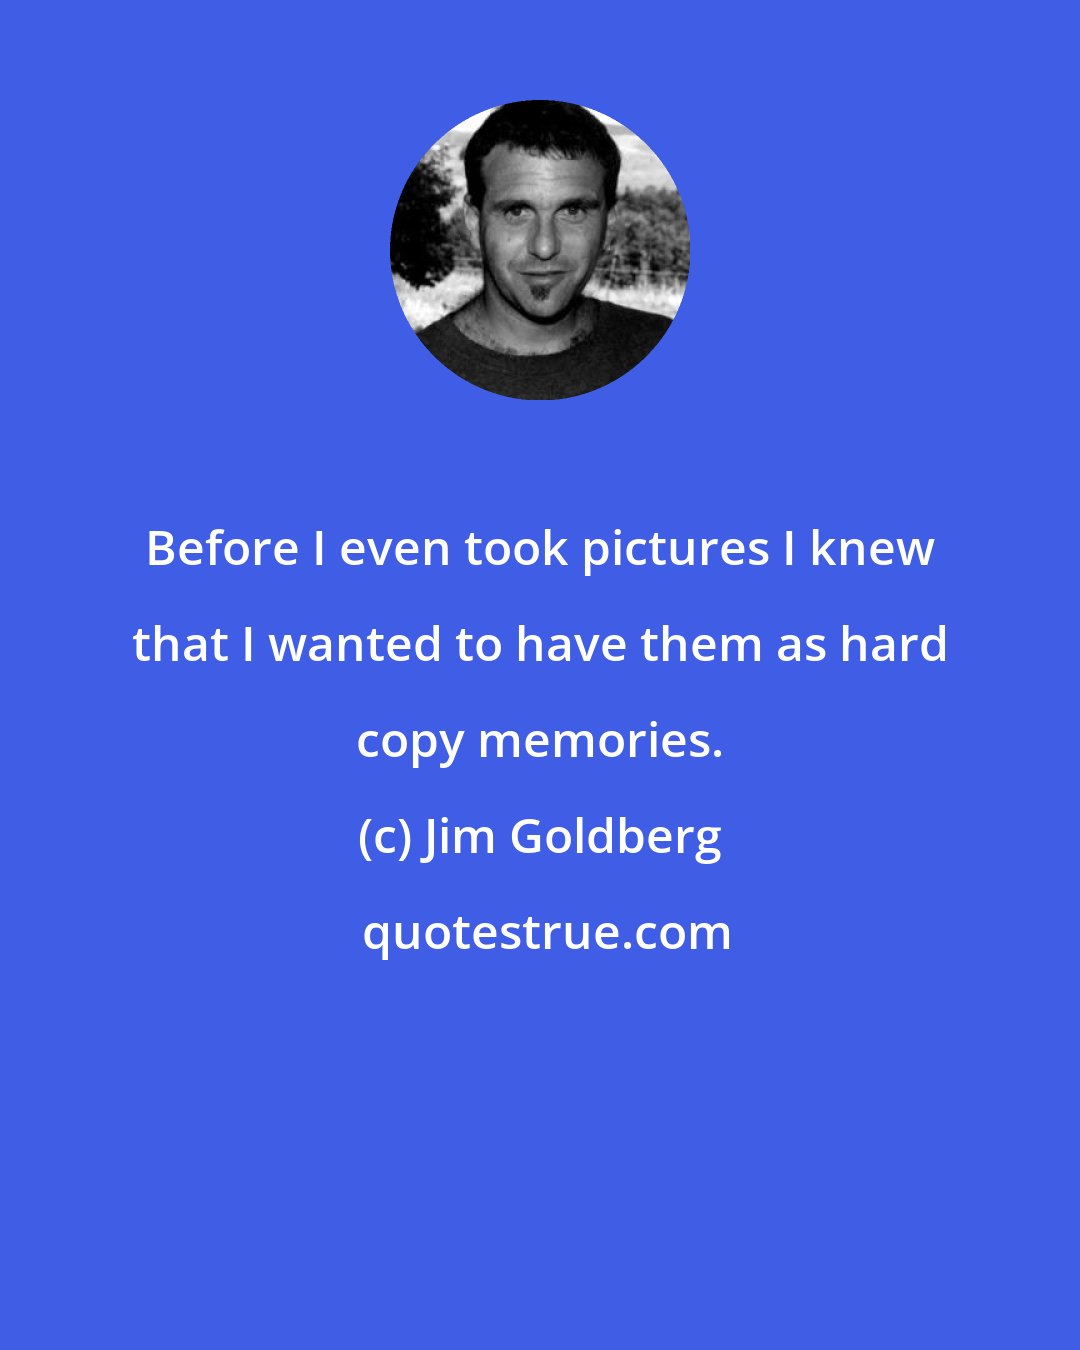 Jim Goldberg: Before I even took pictures I knew that I wanted to have them as hard copy memories.